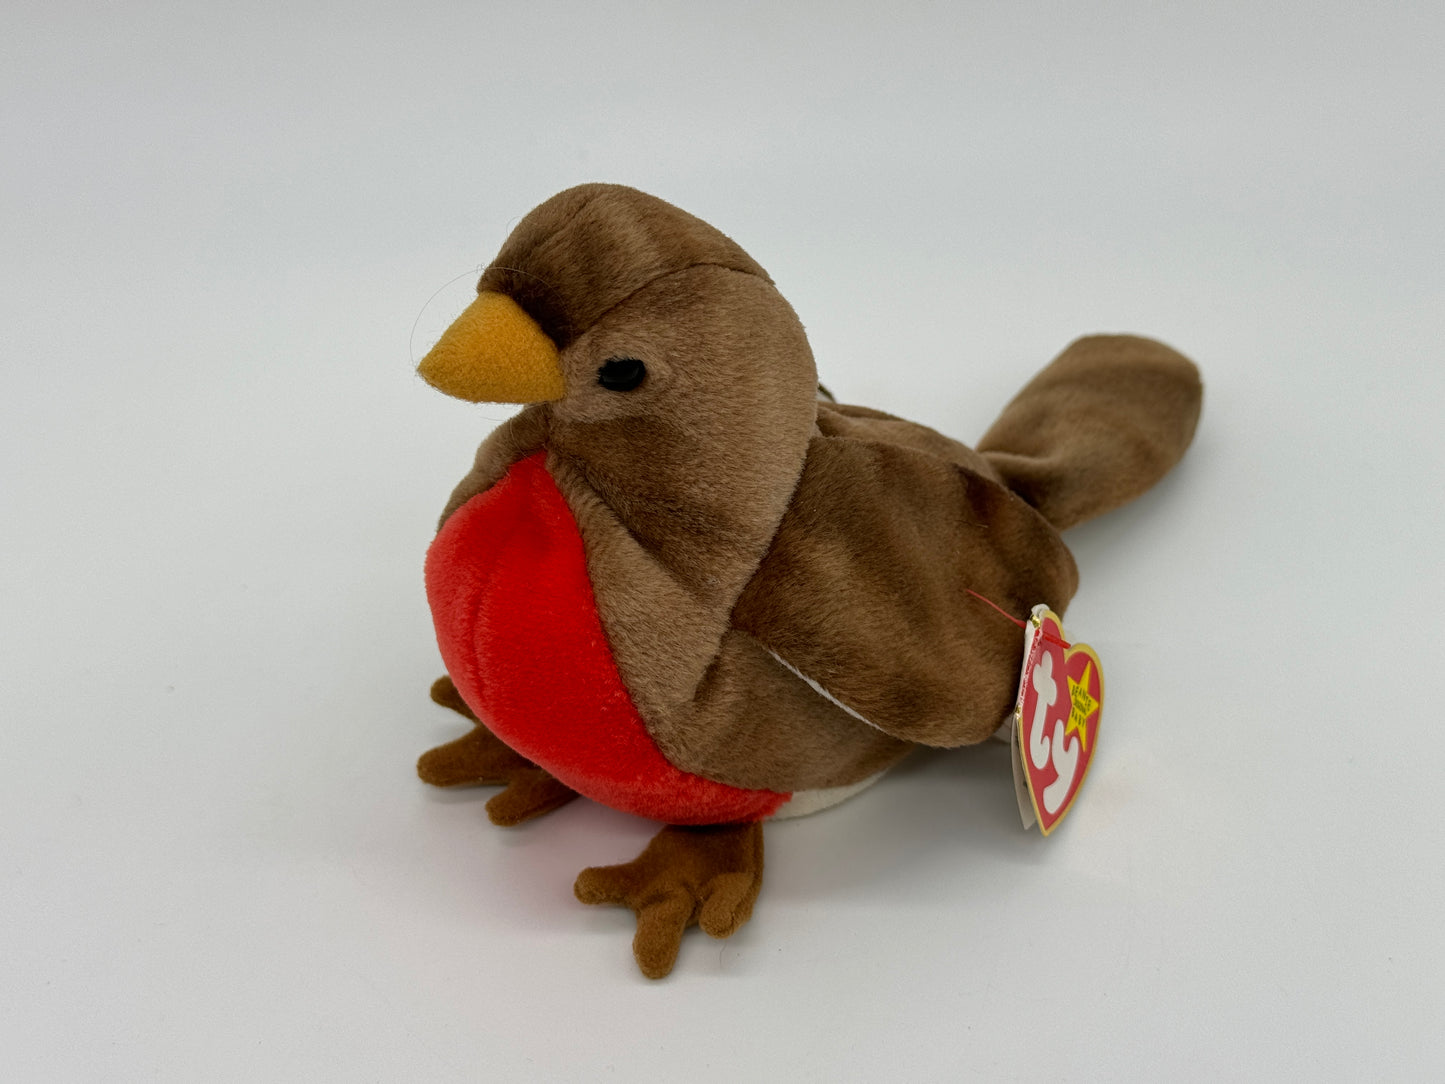 TY Beanie Babies "Early Rotkehlchen Red Breasted Robin" Birth: März, 1997